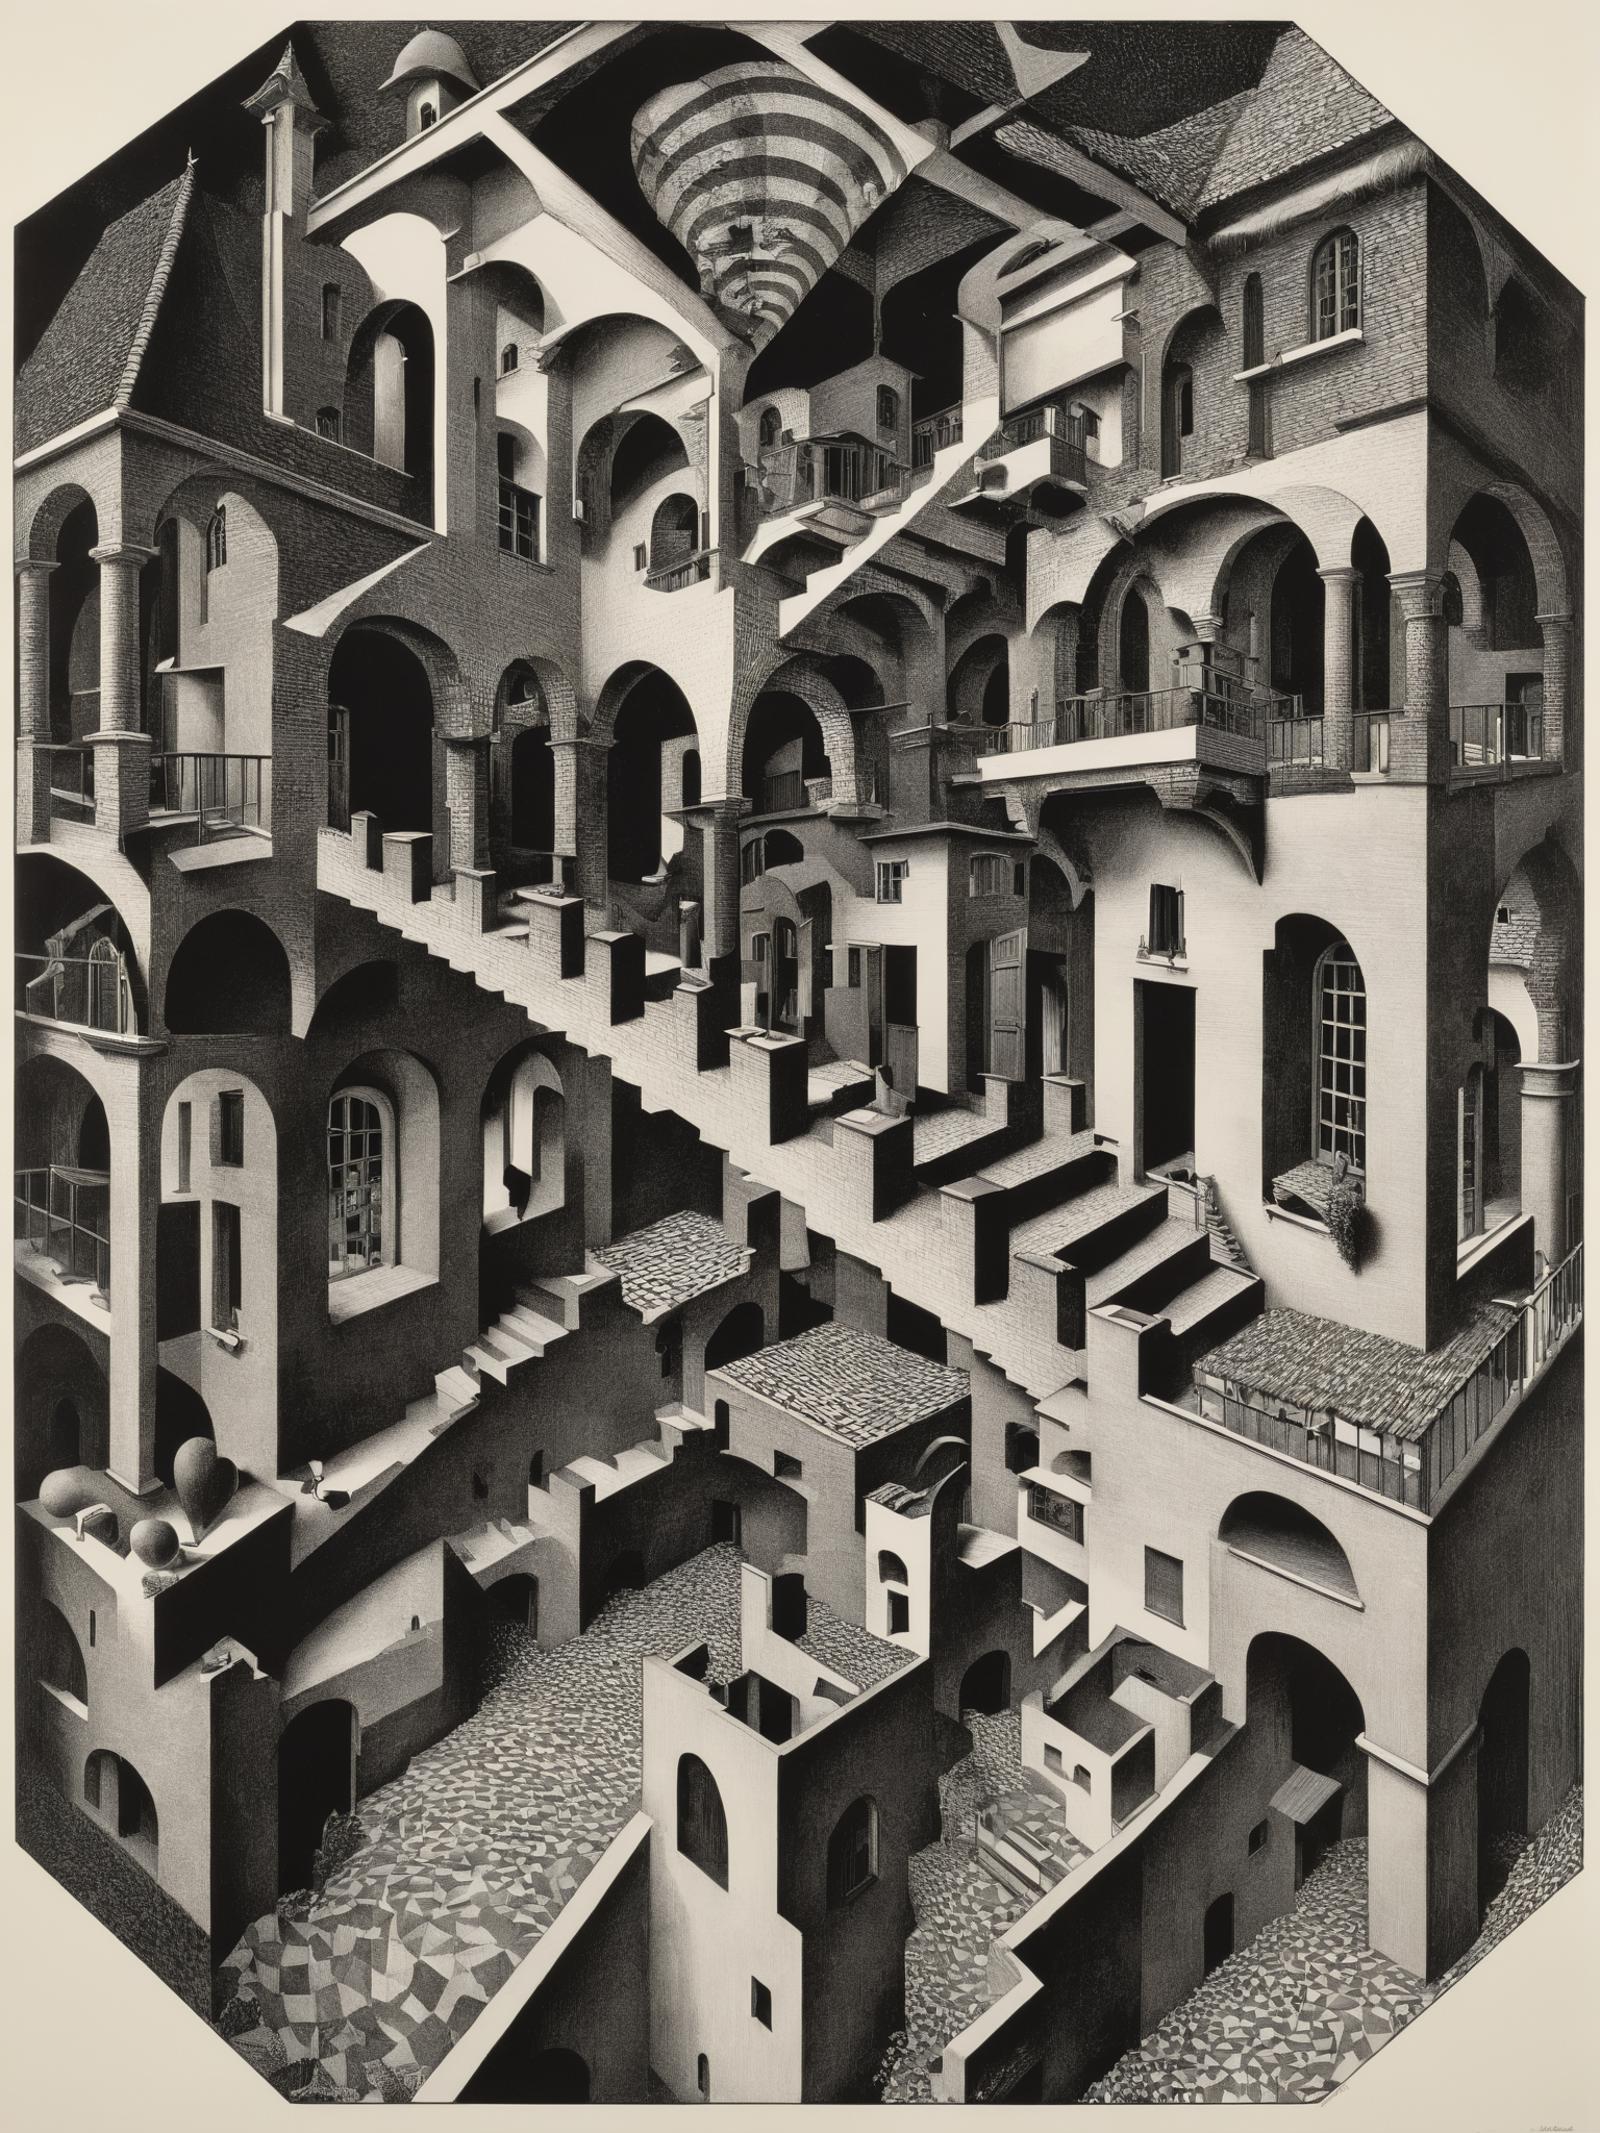 A black and white drawing of a maze-like stairwell

The image is a black and white drawing of a stairwell that features a series of stairs and hallways that form a maze-like structure. The stairs are in various positions, creating a sense of depth and complexity within the drawing. The stairwell is surrounded by tall buildings, which further enhances the visual appeal of the scene. The black and white color scheme adds a touch of elegance and timelessness to the image, making it an intriguing and thought-provoking piece of art